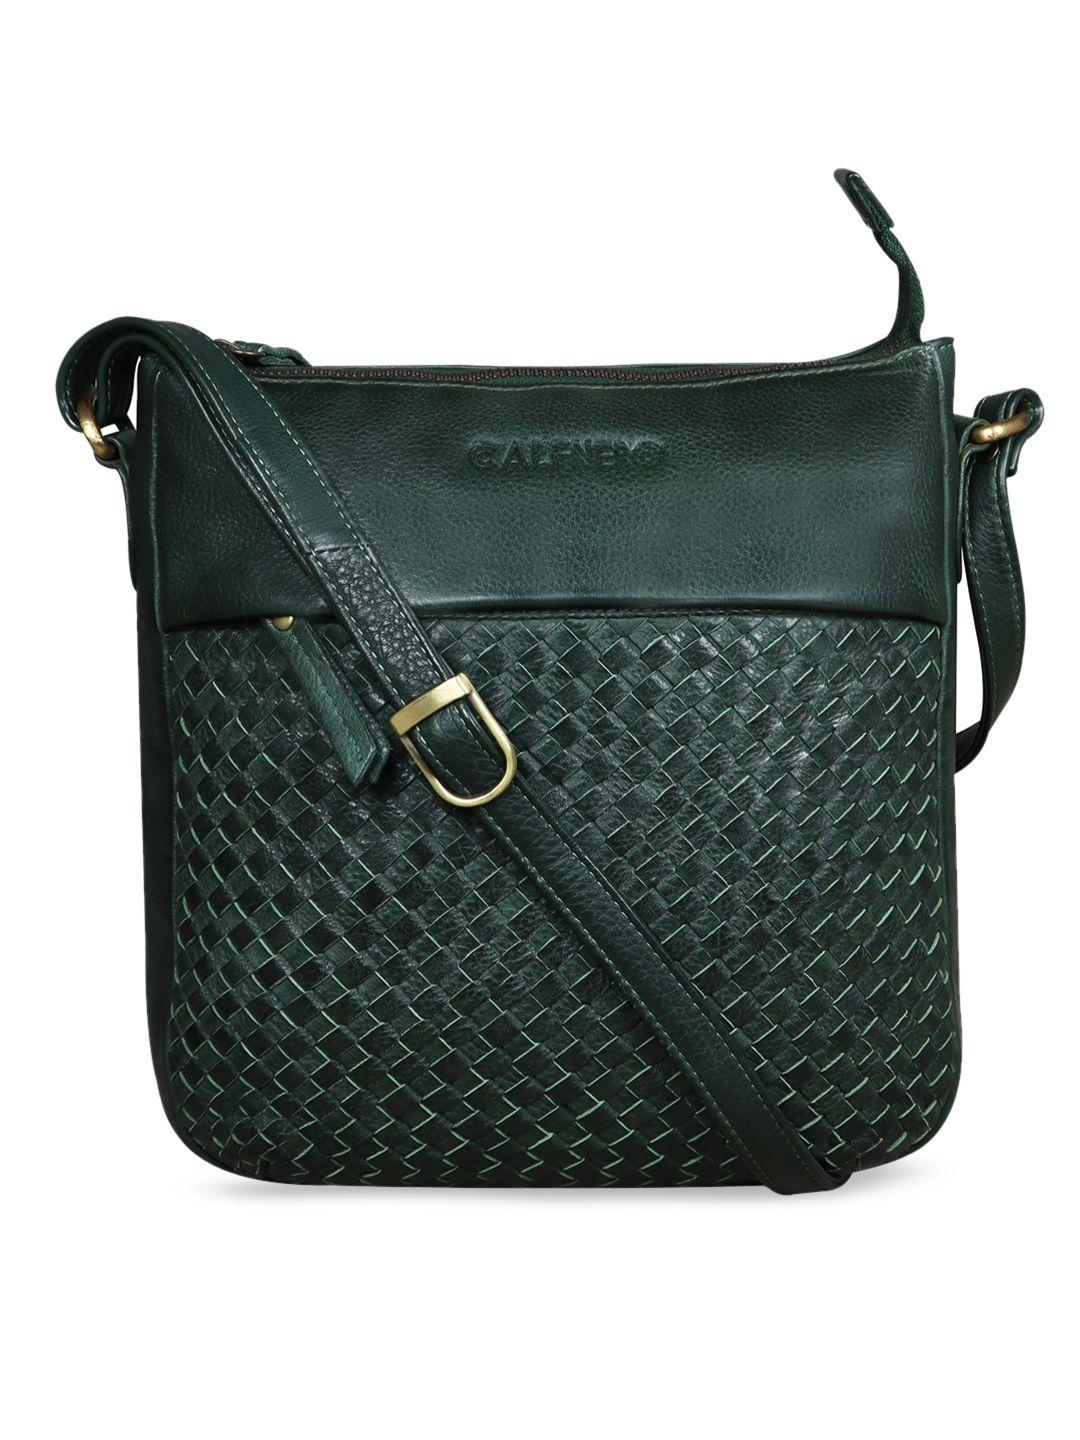 calfnero green geometric textured leather structured sling bag